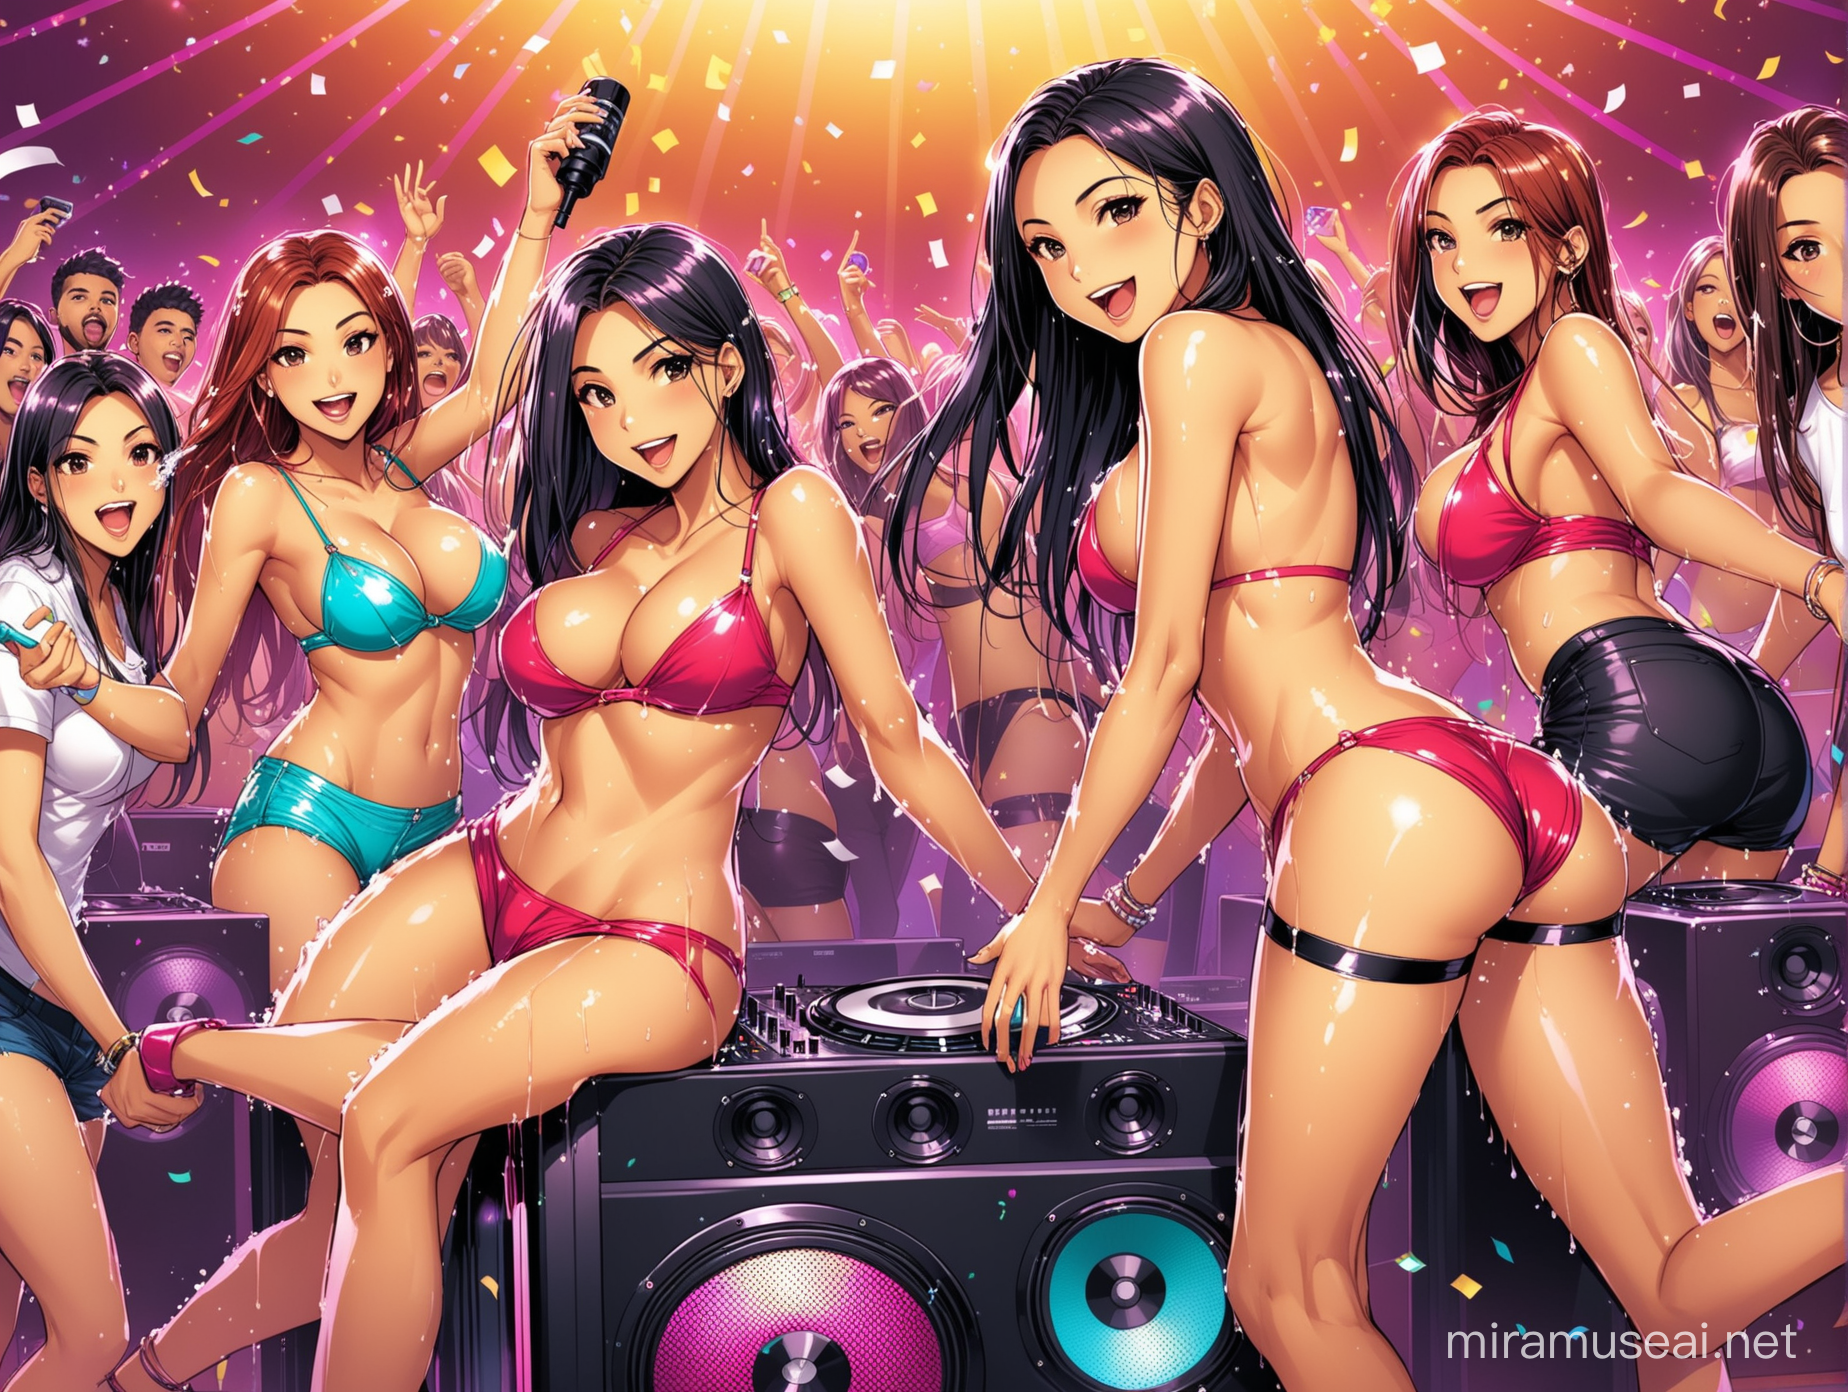 house party flyer
with girls stripping on the on a big speaker, while the boys spray cash and the DJ on top of the speaker played music